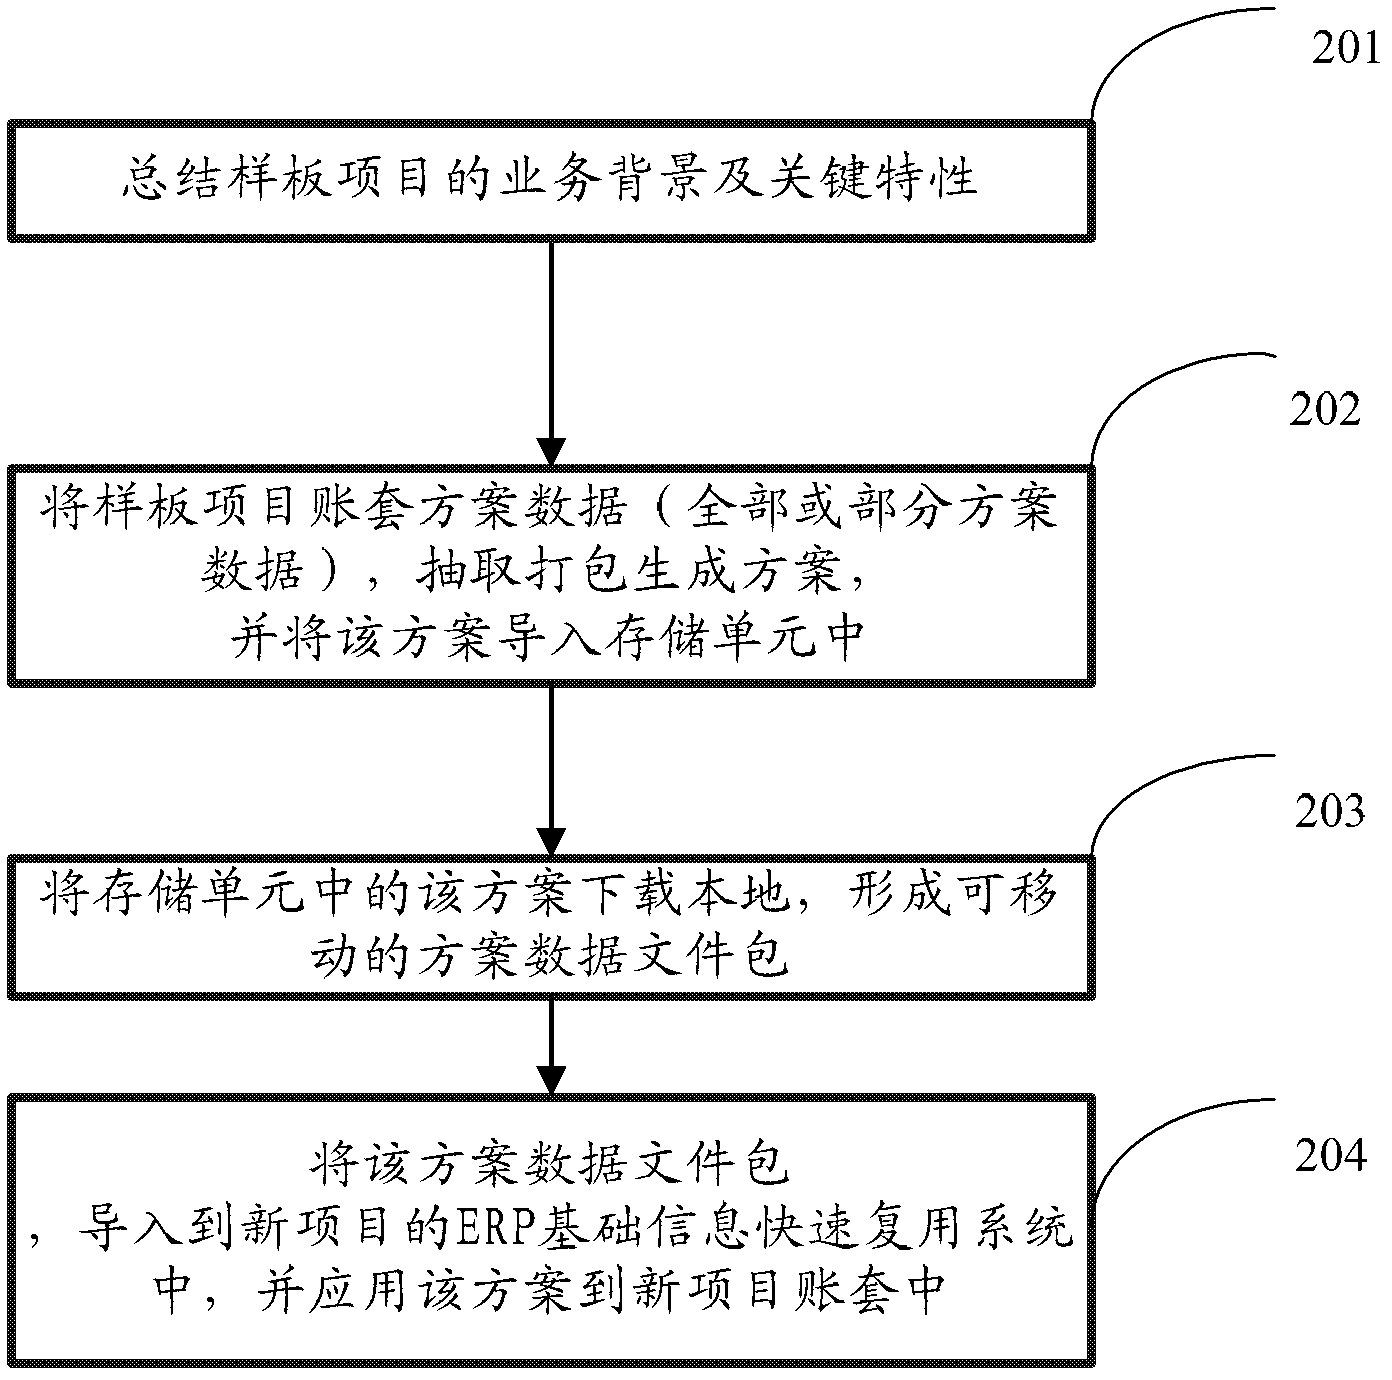 Method and system for quickly multiplexing enterprise resource planning (ERP) basic information